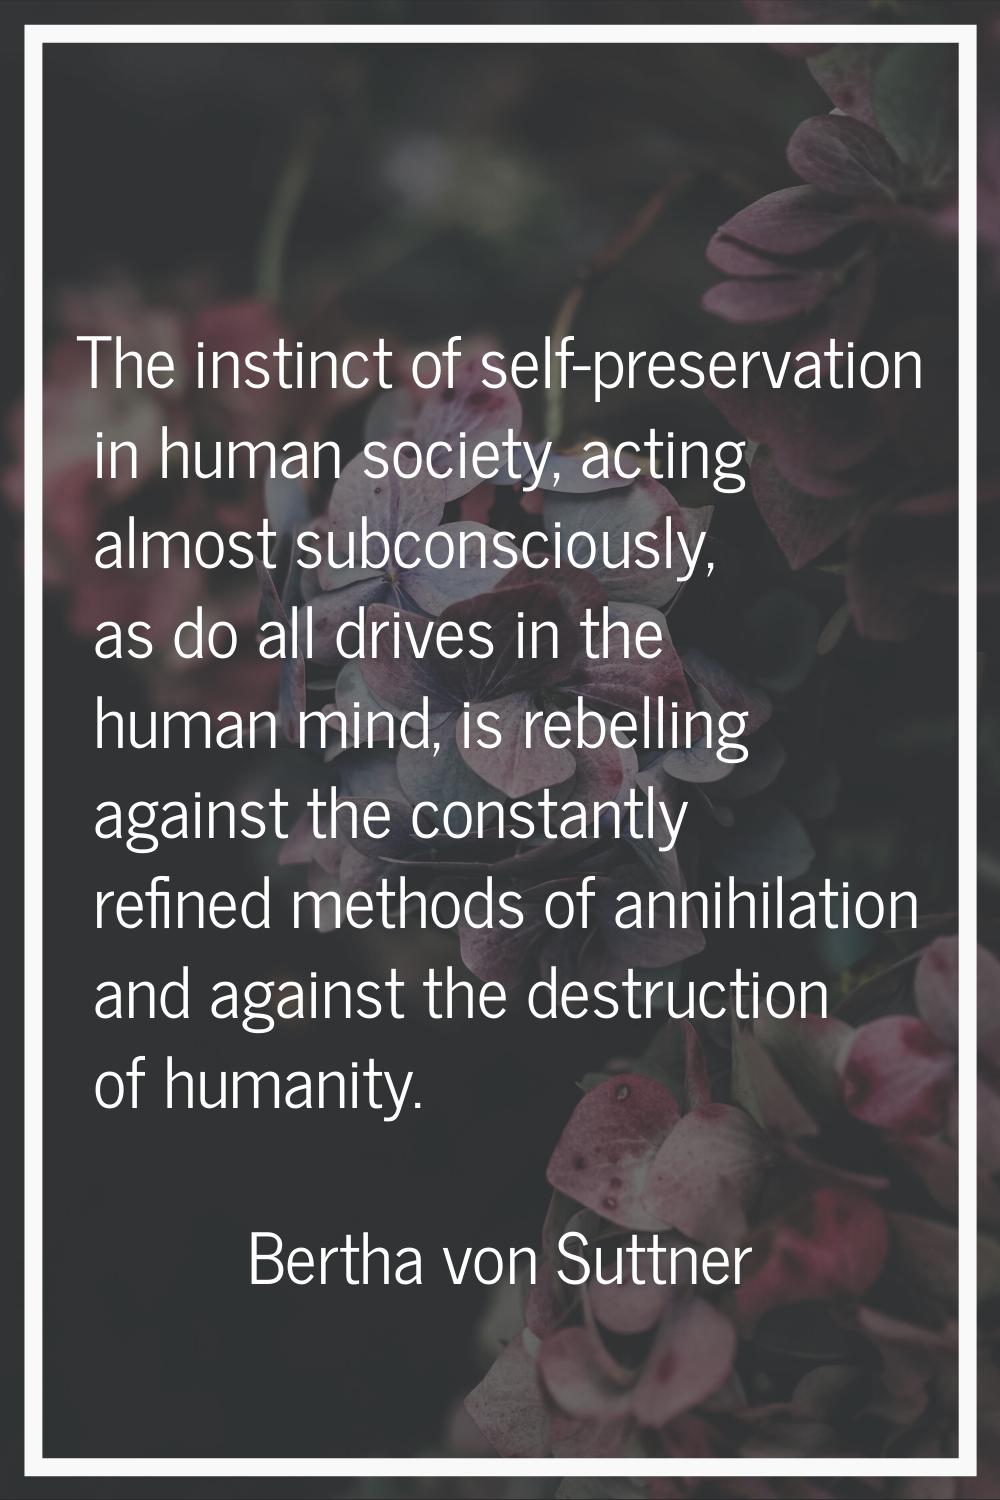 The instinct of self-preservation in human society, acting almost subconsciously, as do all drives 